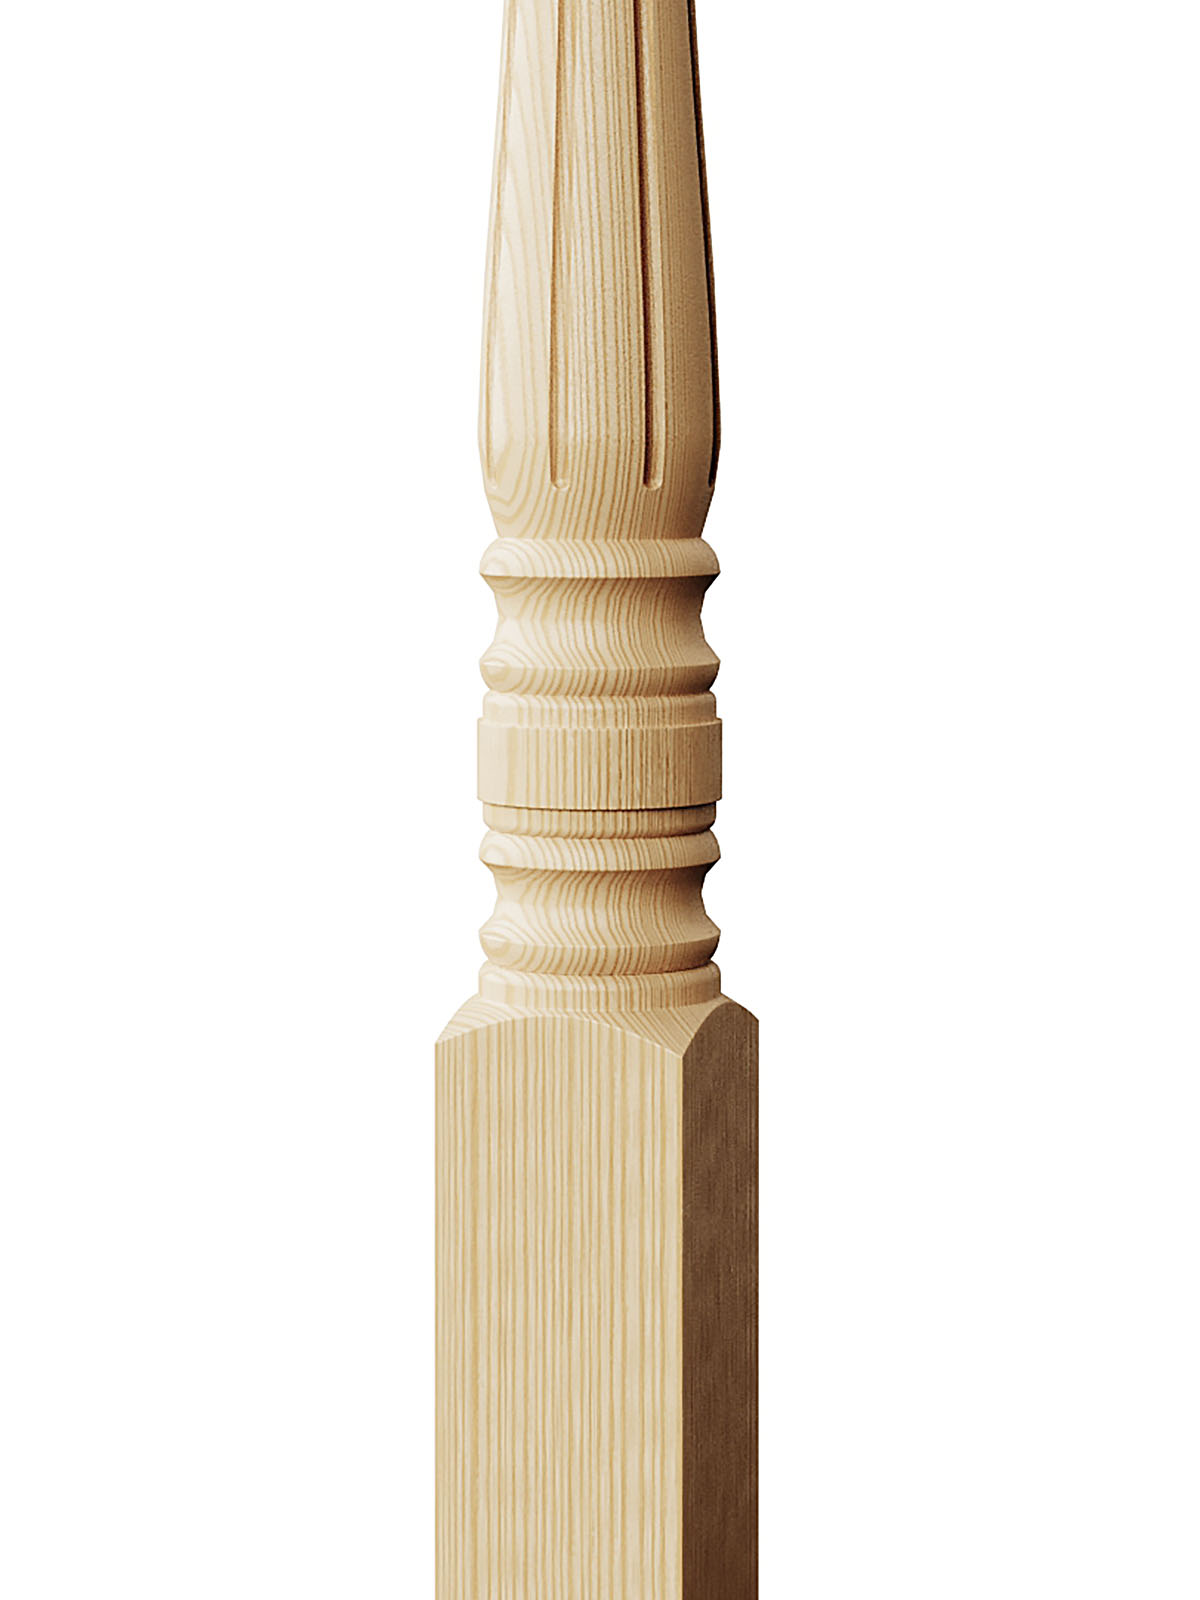 Williamsburg Over the Post Newel (Fluted)